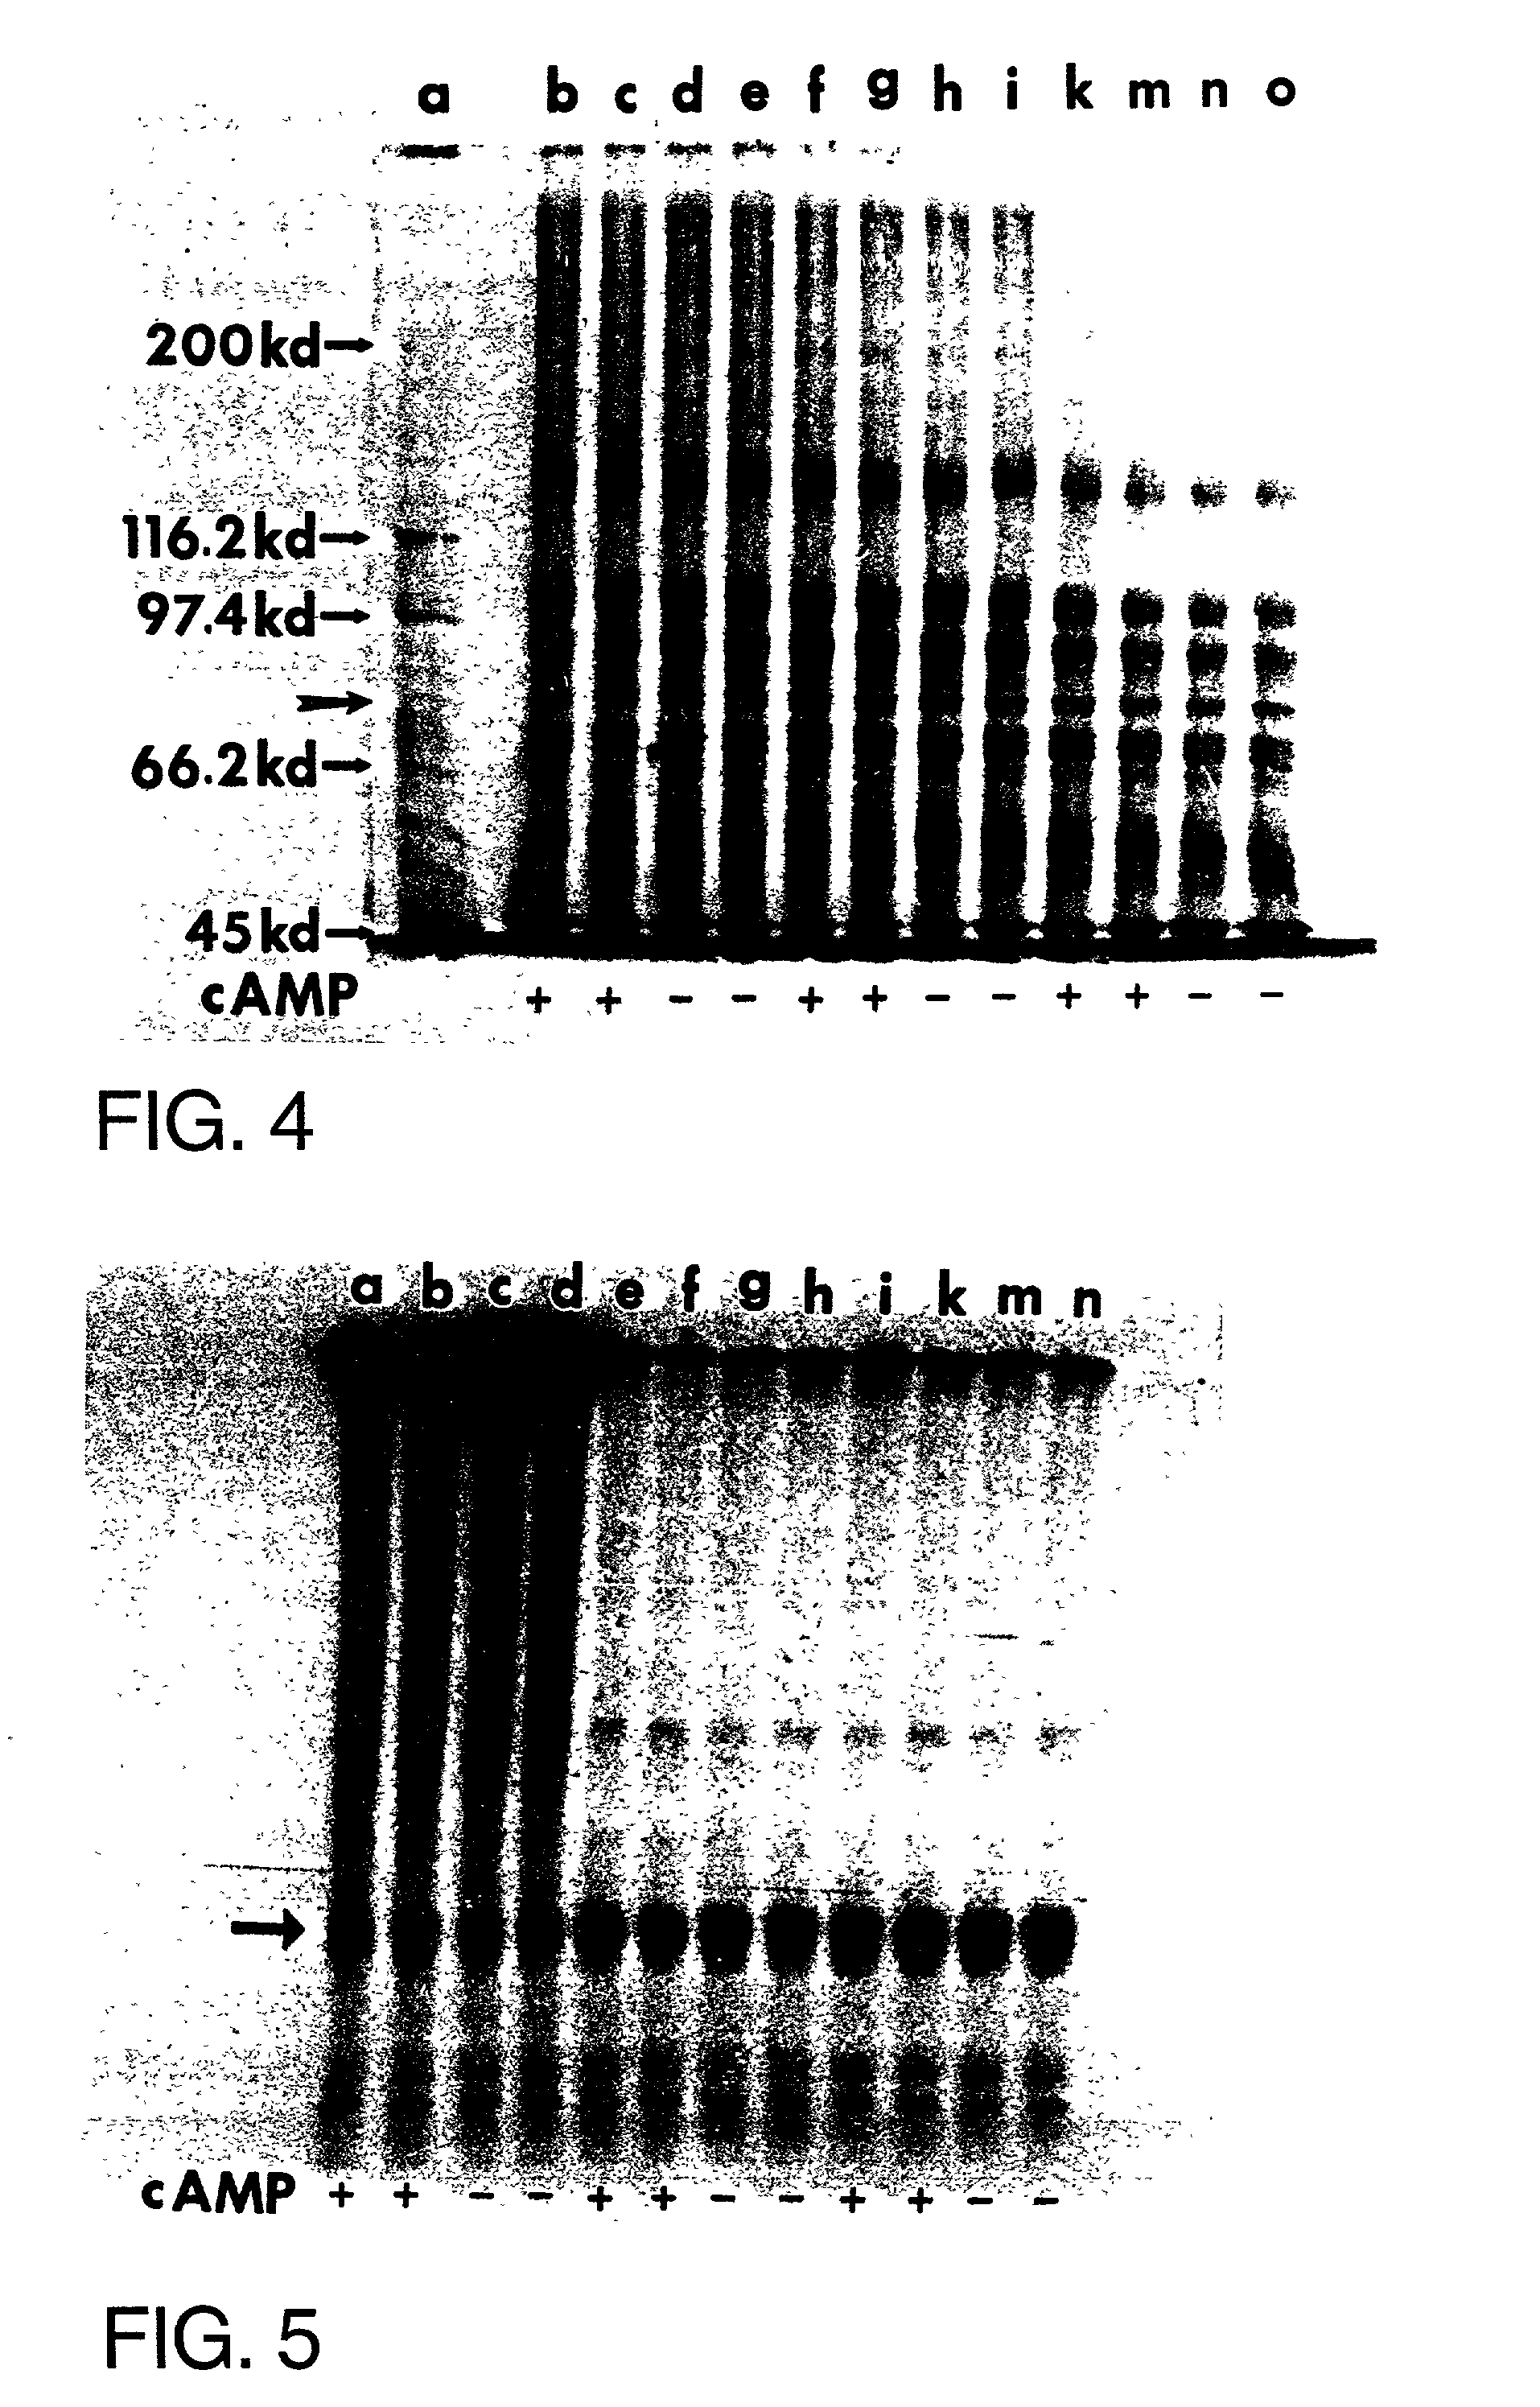 Method of determining volume dependent hypertension through protein reduction in phosphorylation or concentration and related apparatus